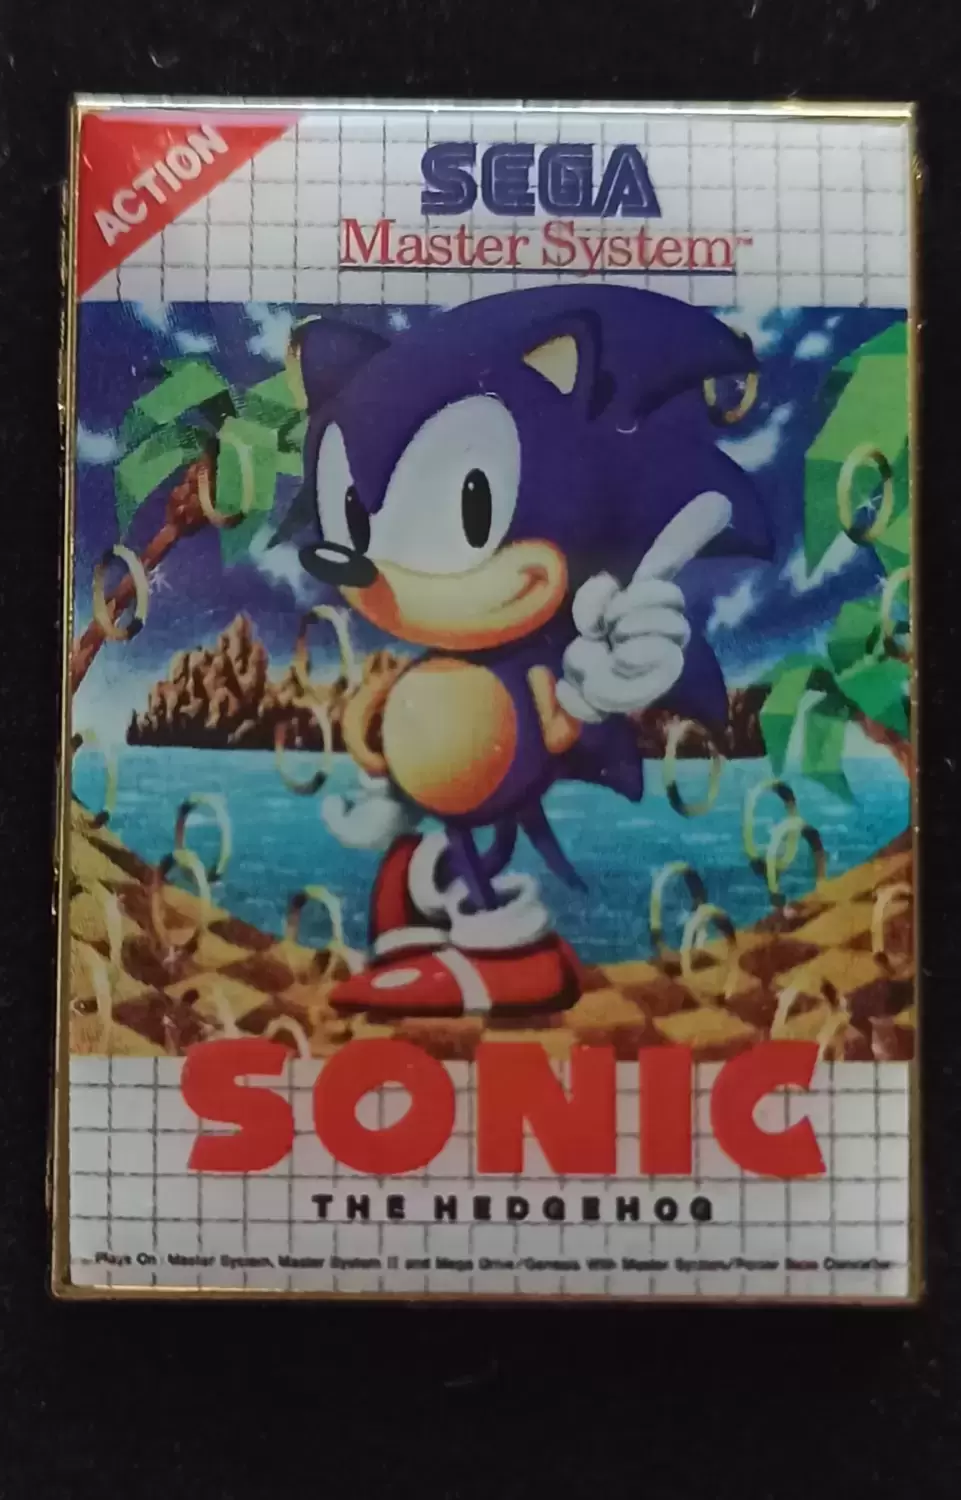 Sonic the Hedgehog - Retro pin badge collection - Master System - Sonic